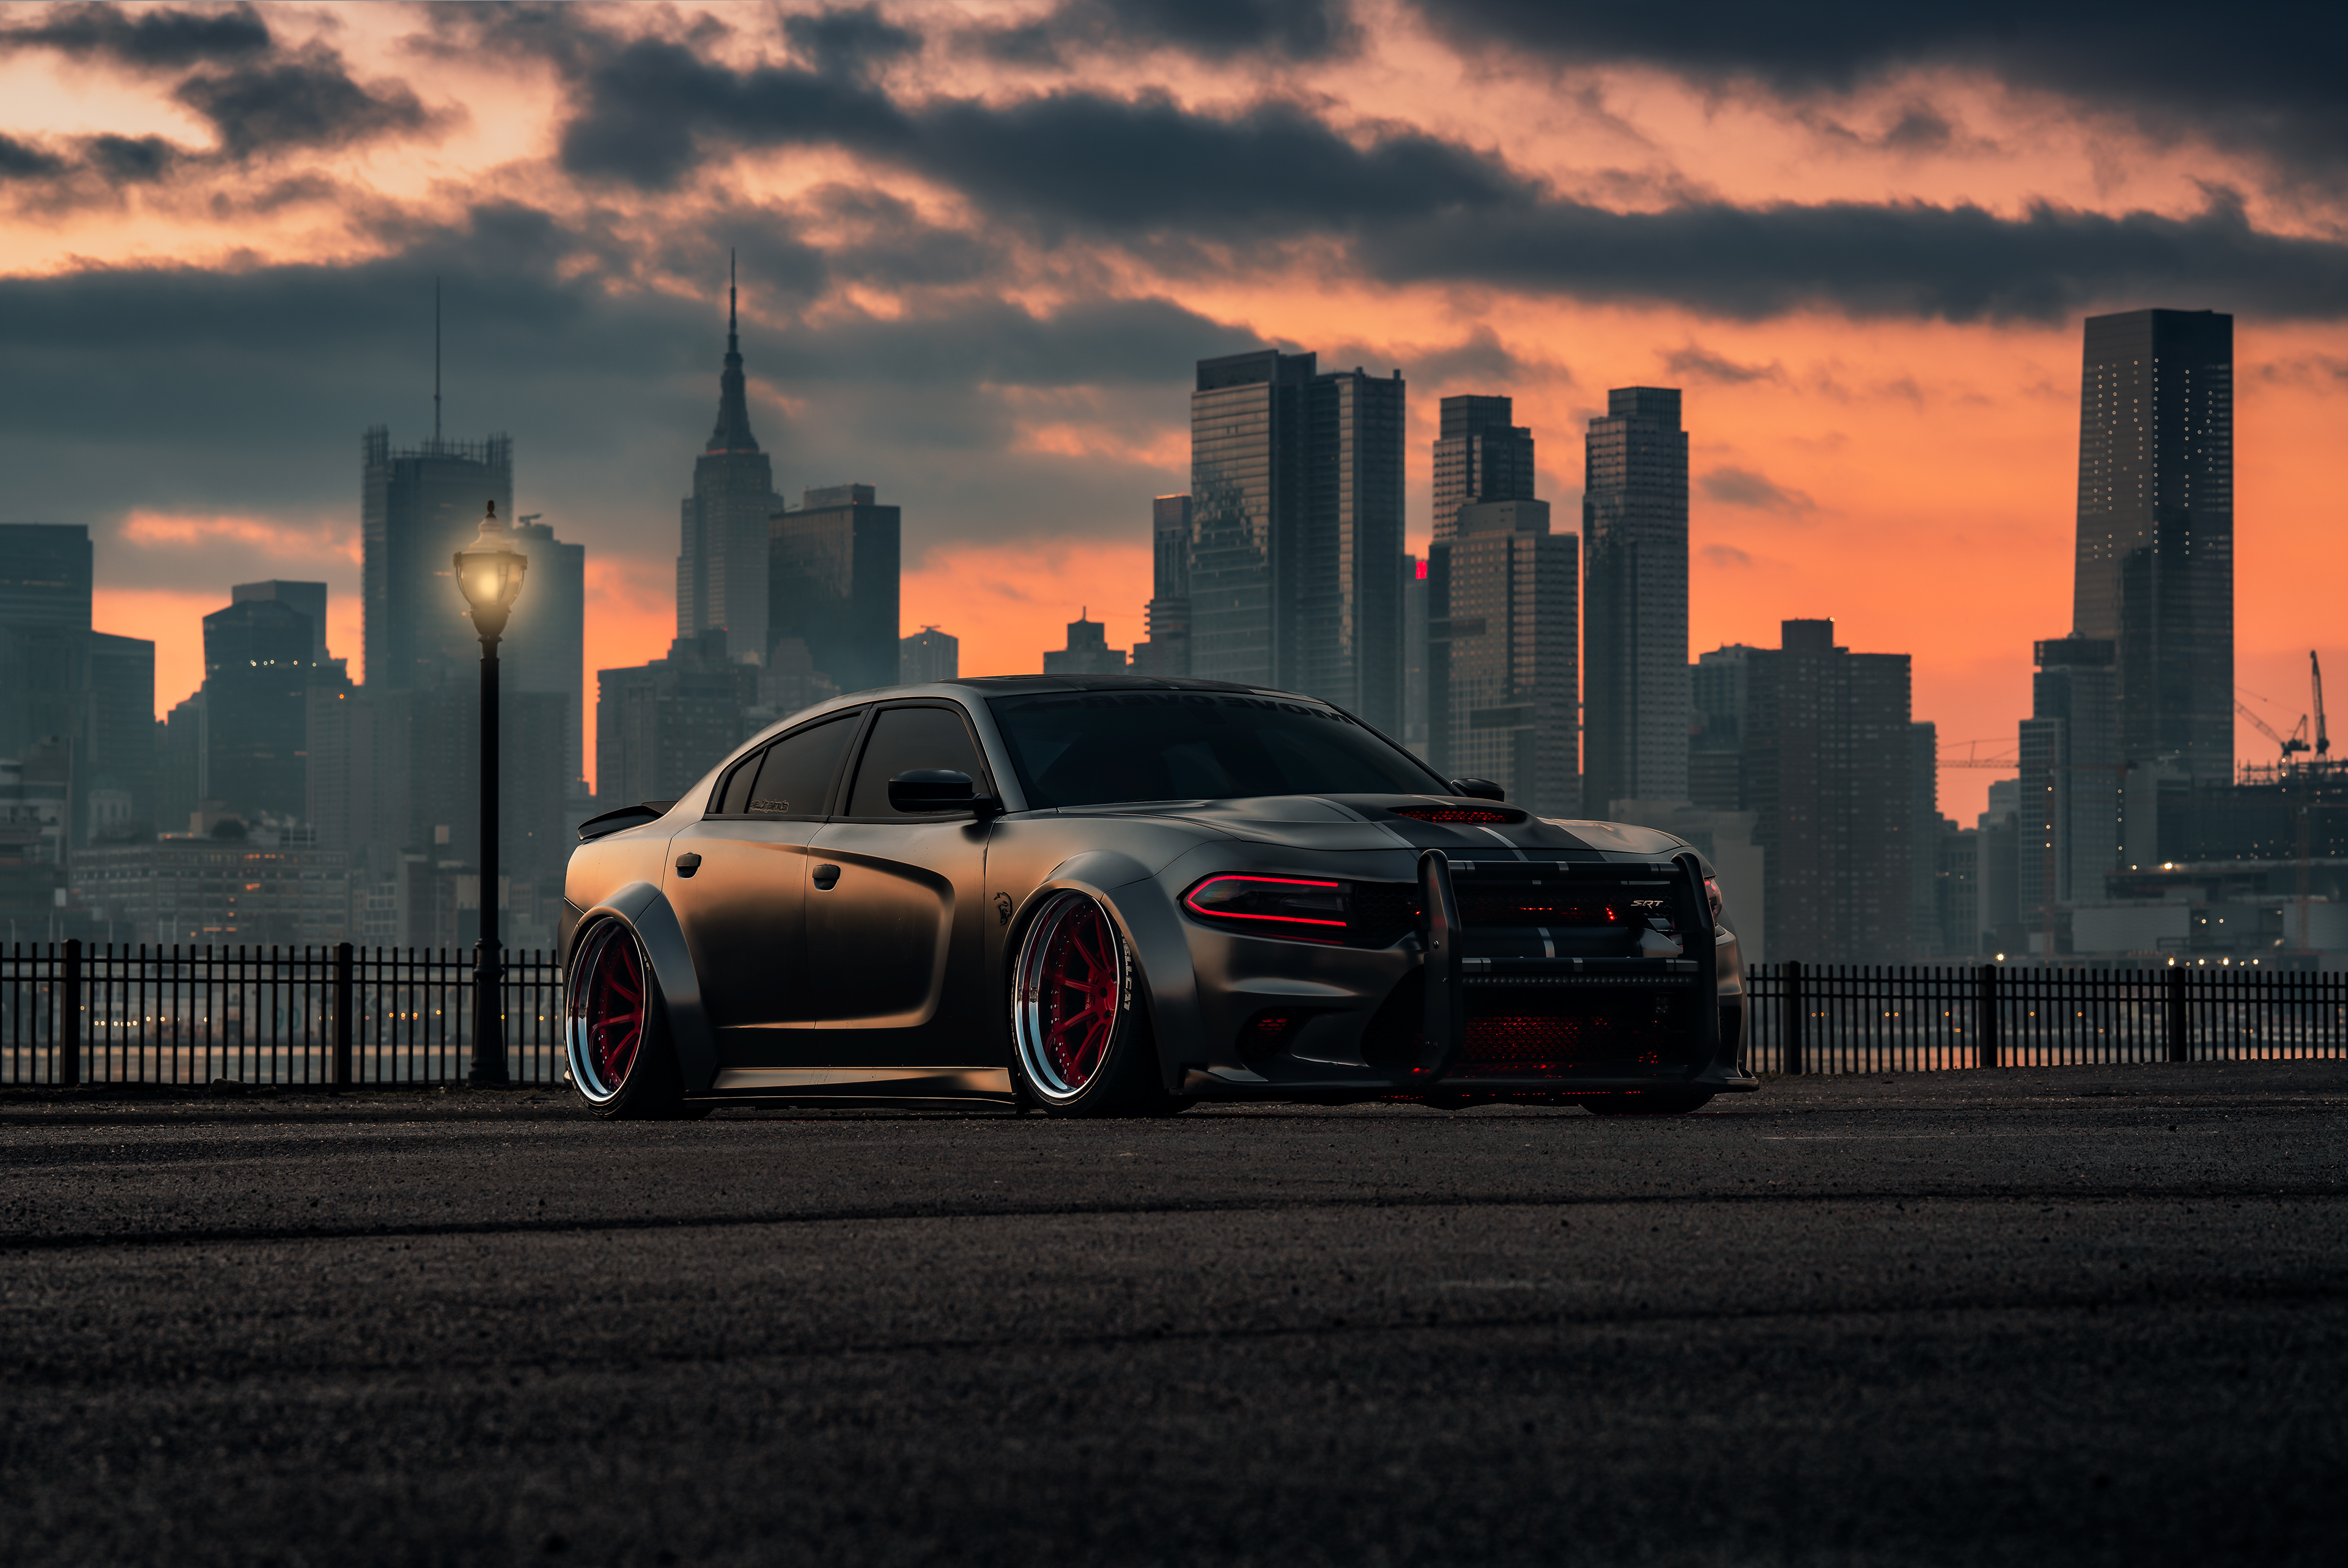 Wallpaper ID 453709  Vehicles Dodge Charger SRT Phone Wallpaper Dodge Dodge  Charger Car Dodge Charger SRT Hellcat Muscle Car 720x1280 free download